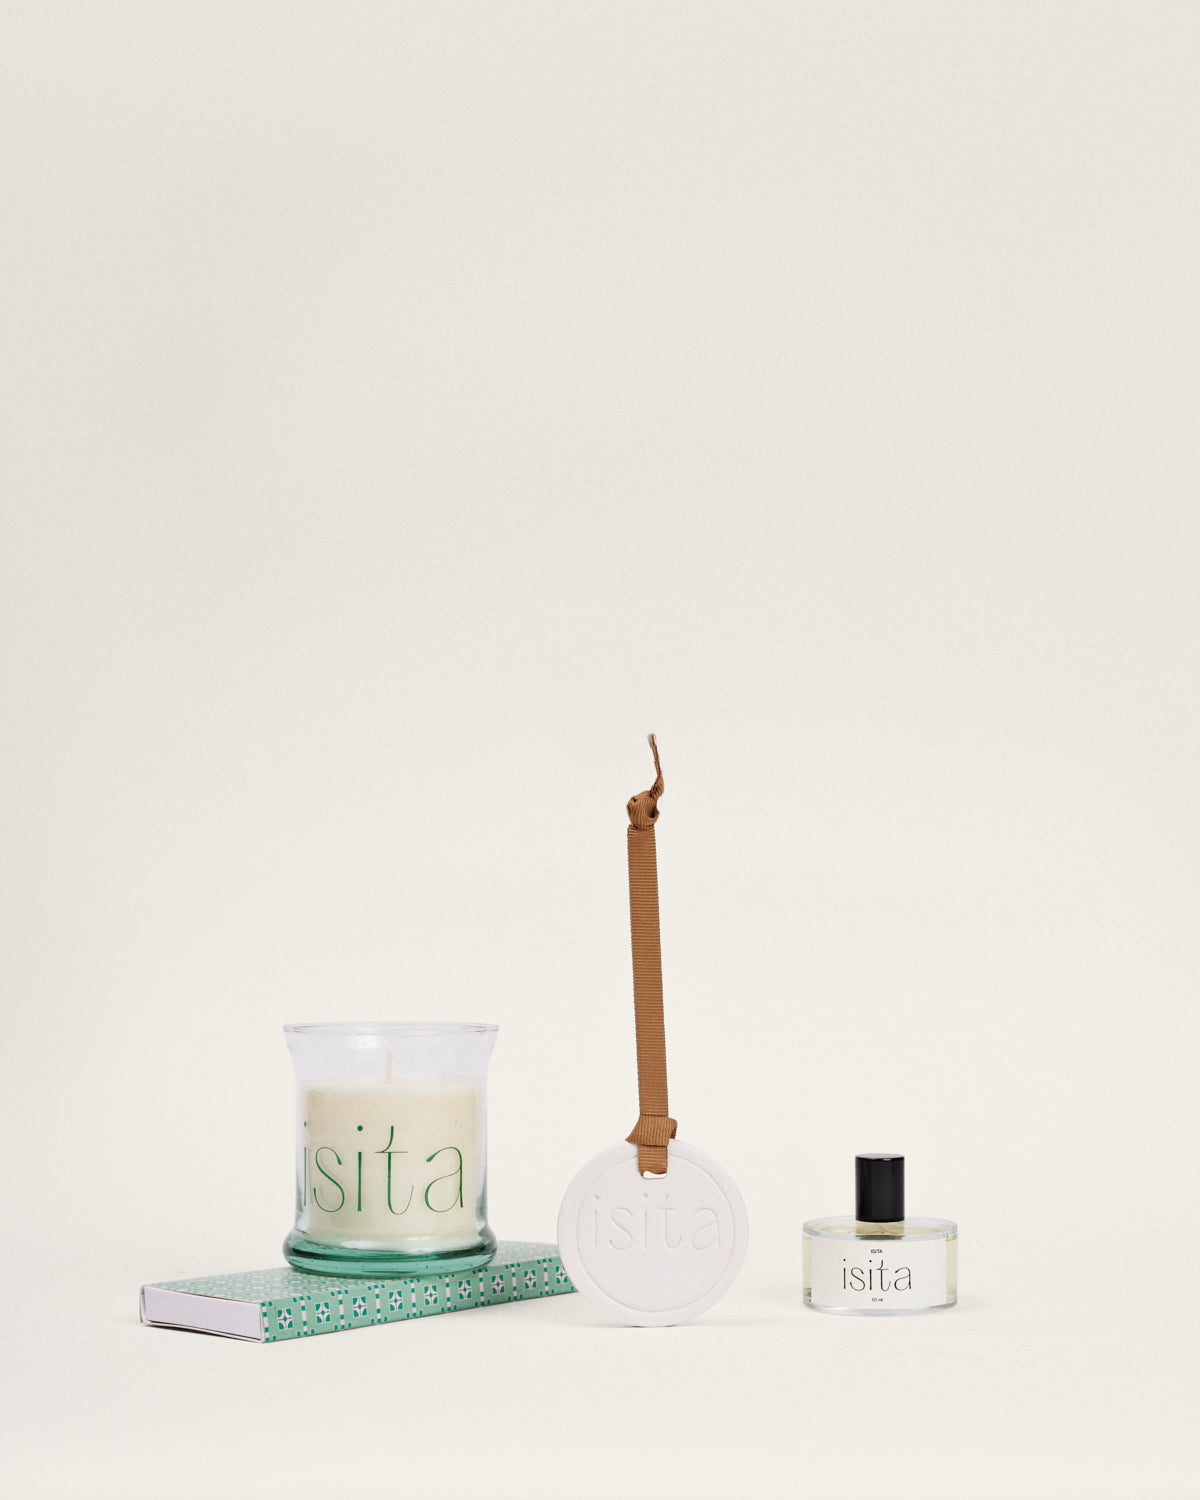 Pack of Isita's candle and diffuser